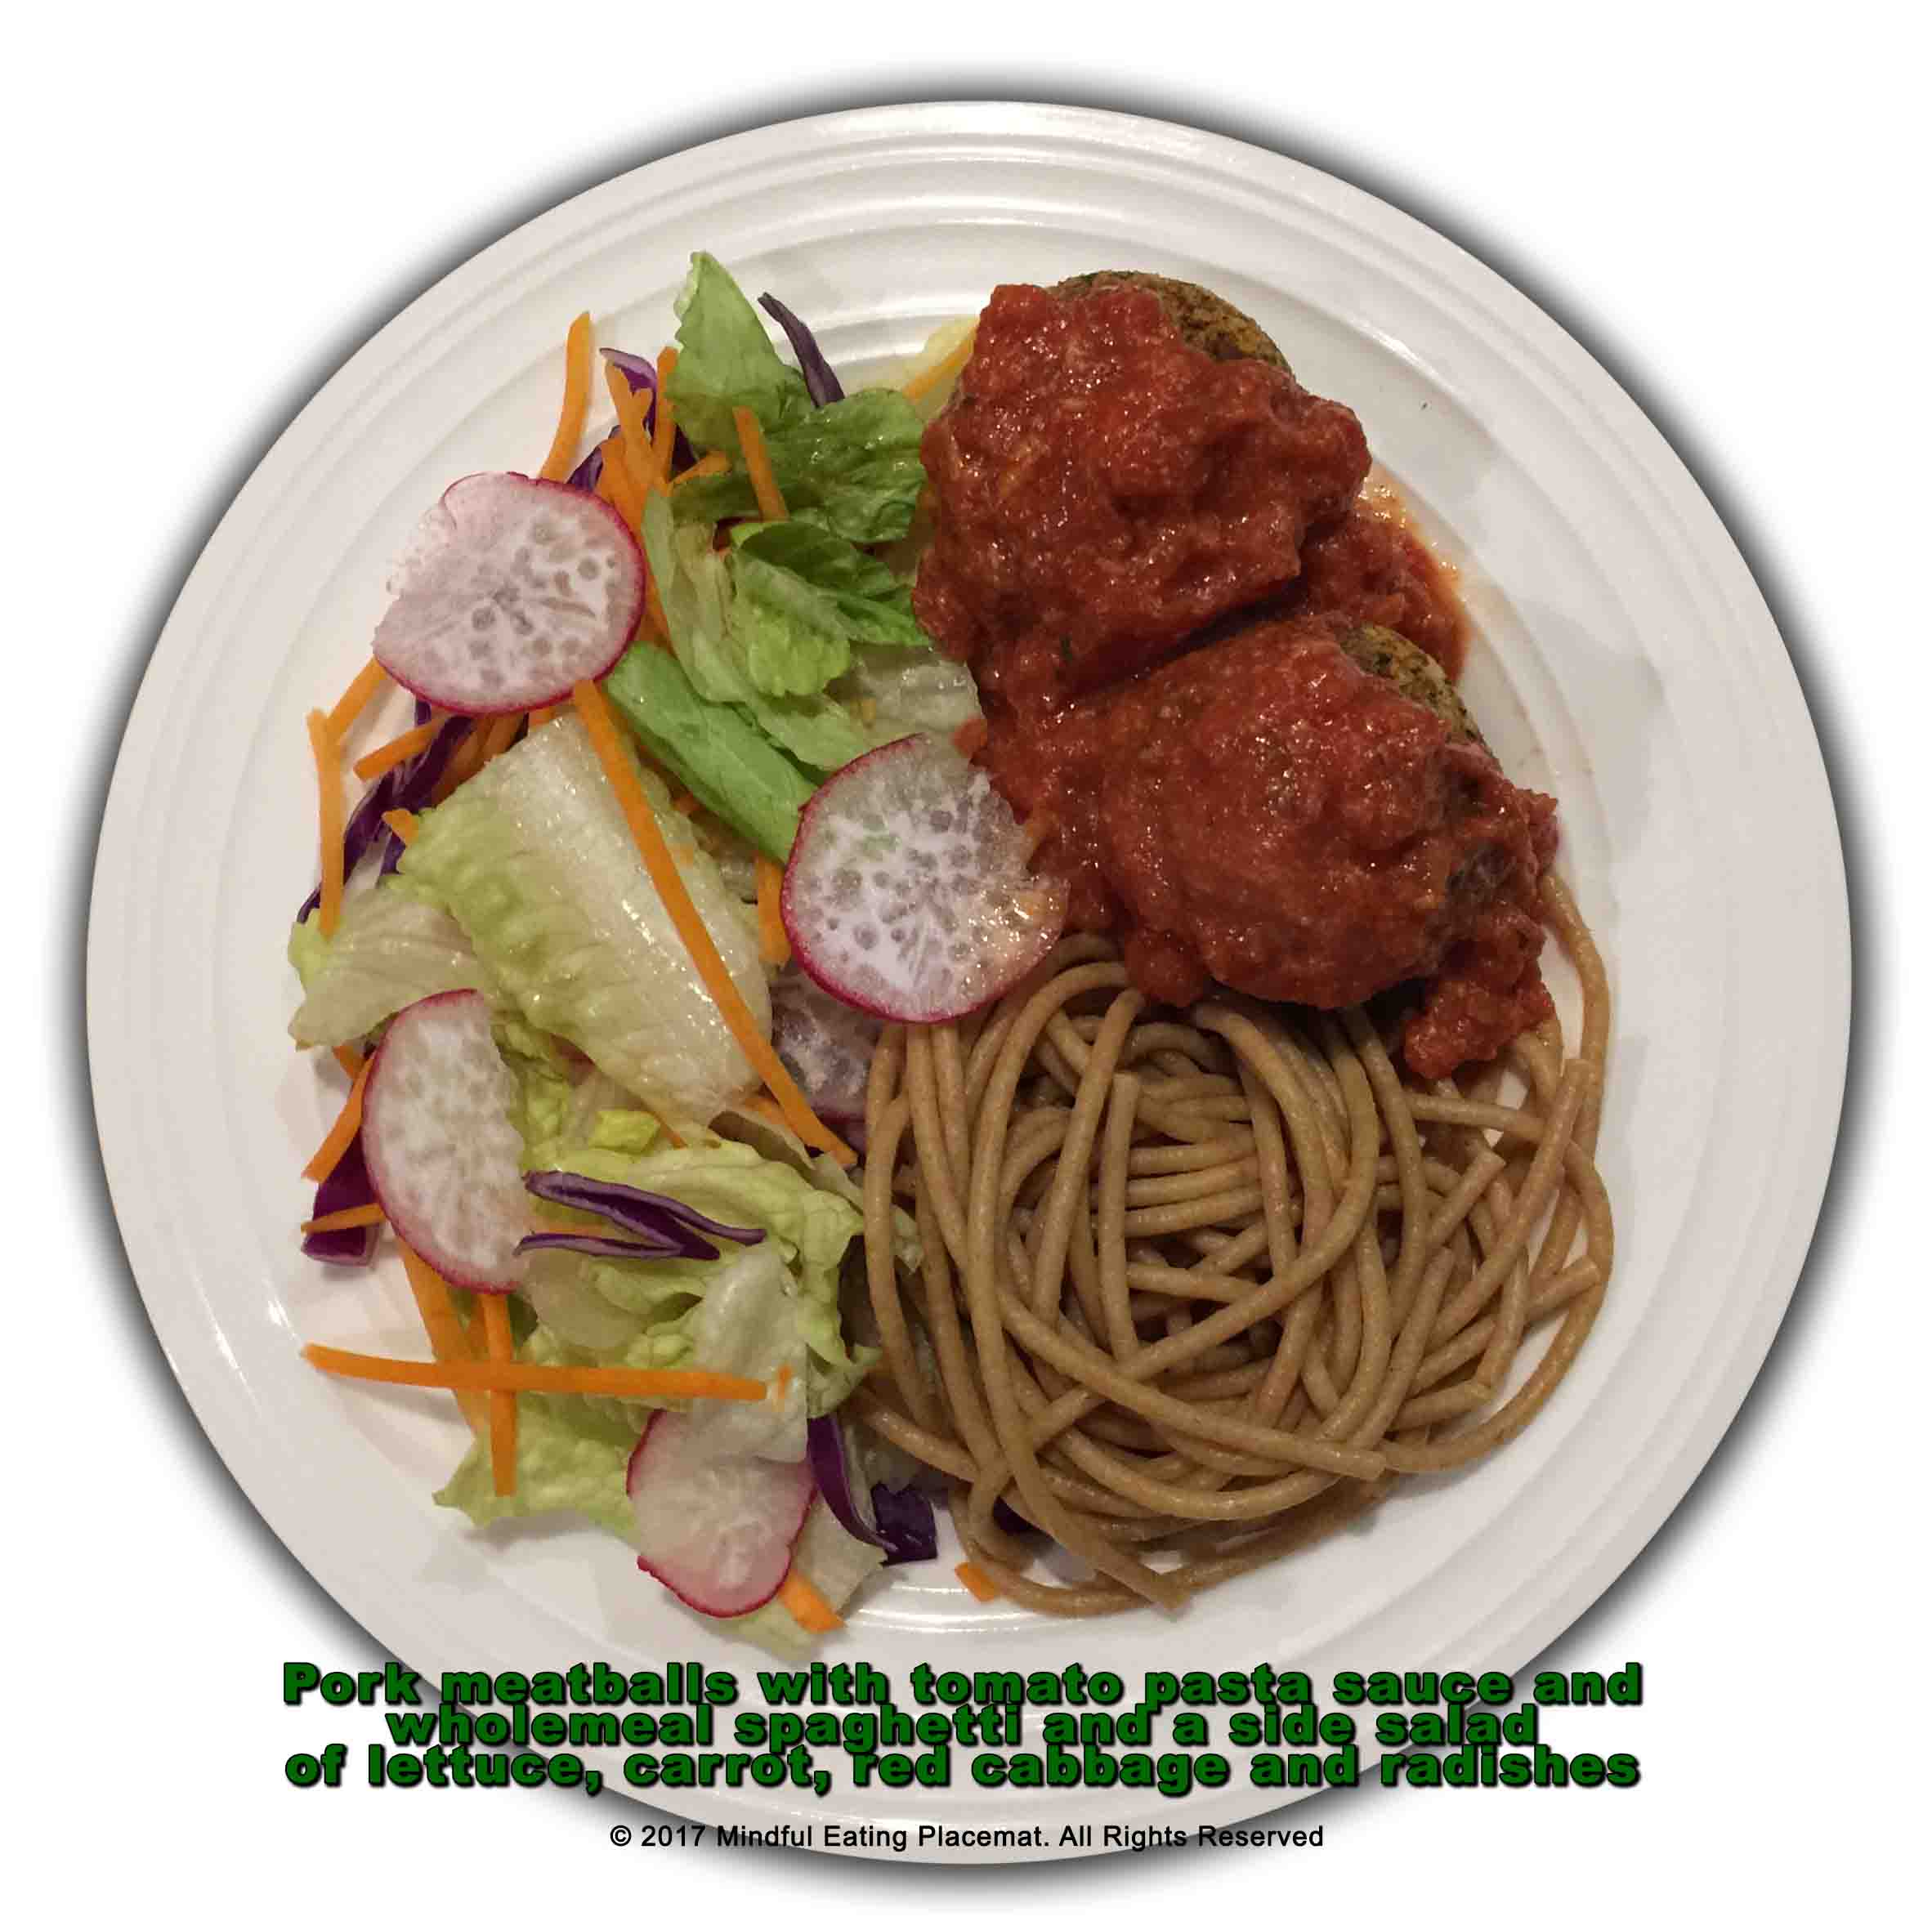 Meatballs with wholemeal spaghetti and salad